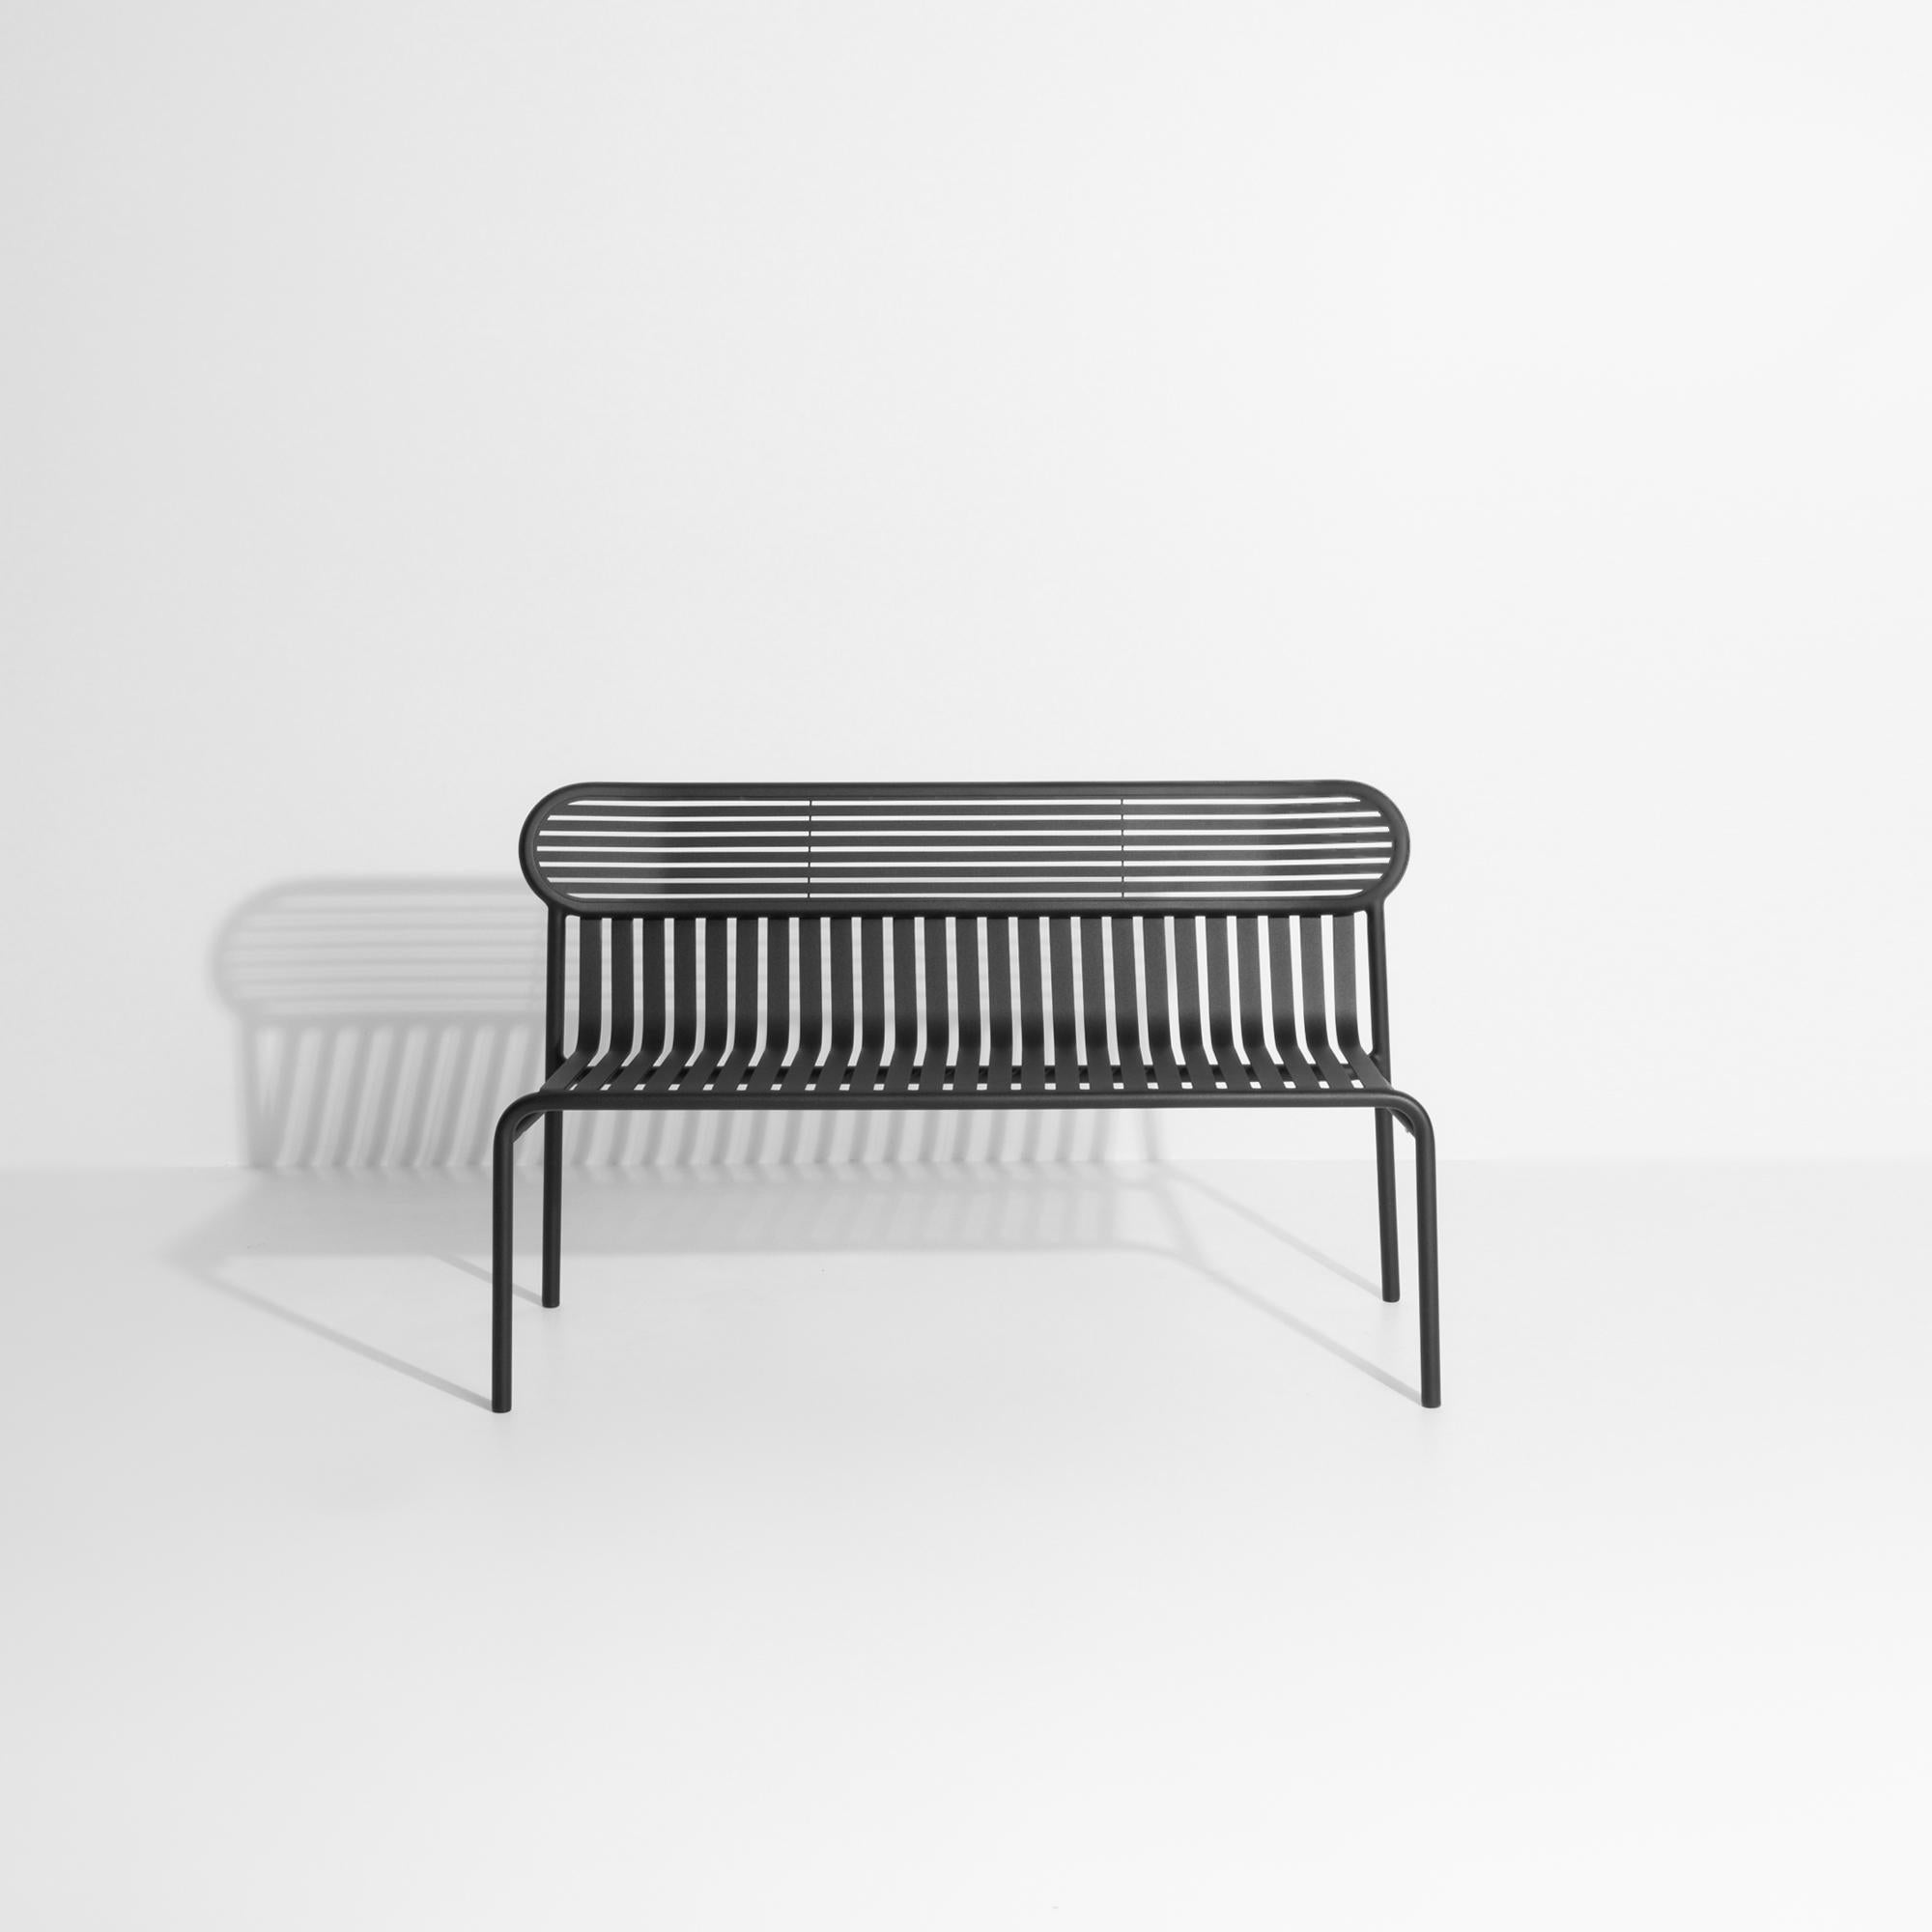 Petite Friture Week-End Bench in Black Aluminium by Studio BrichetZiegler In New Condition For Sale In Brooklyn, NY